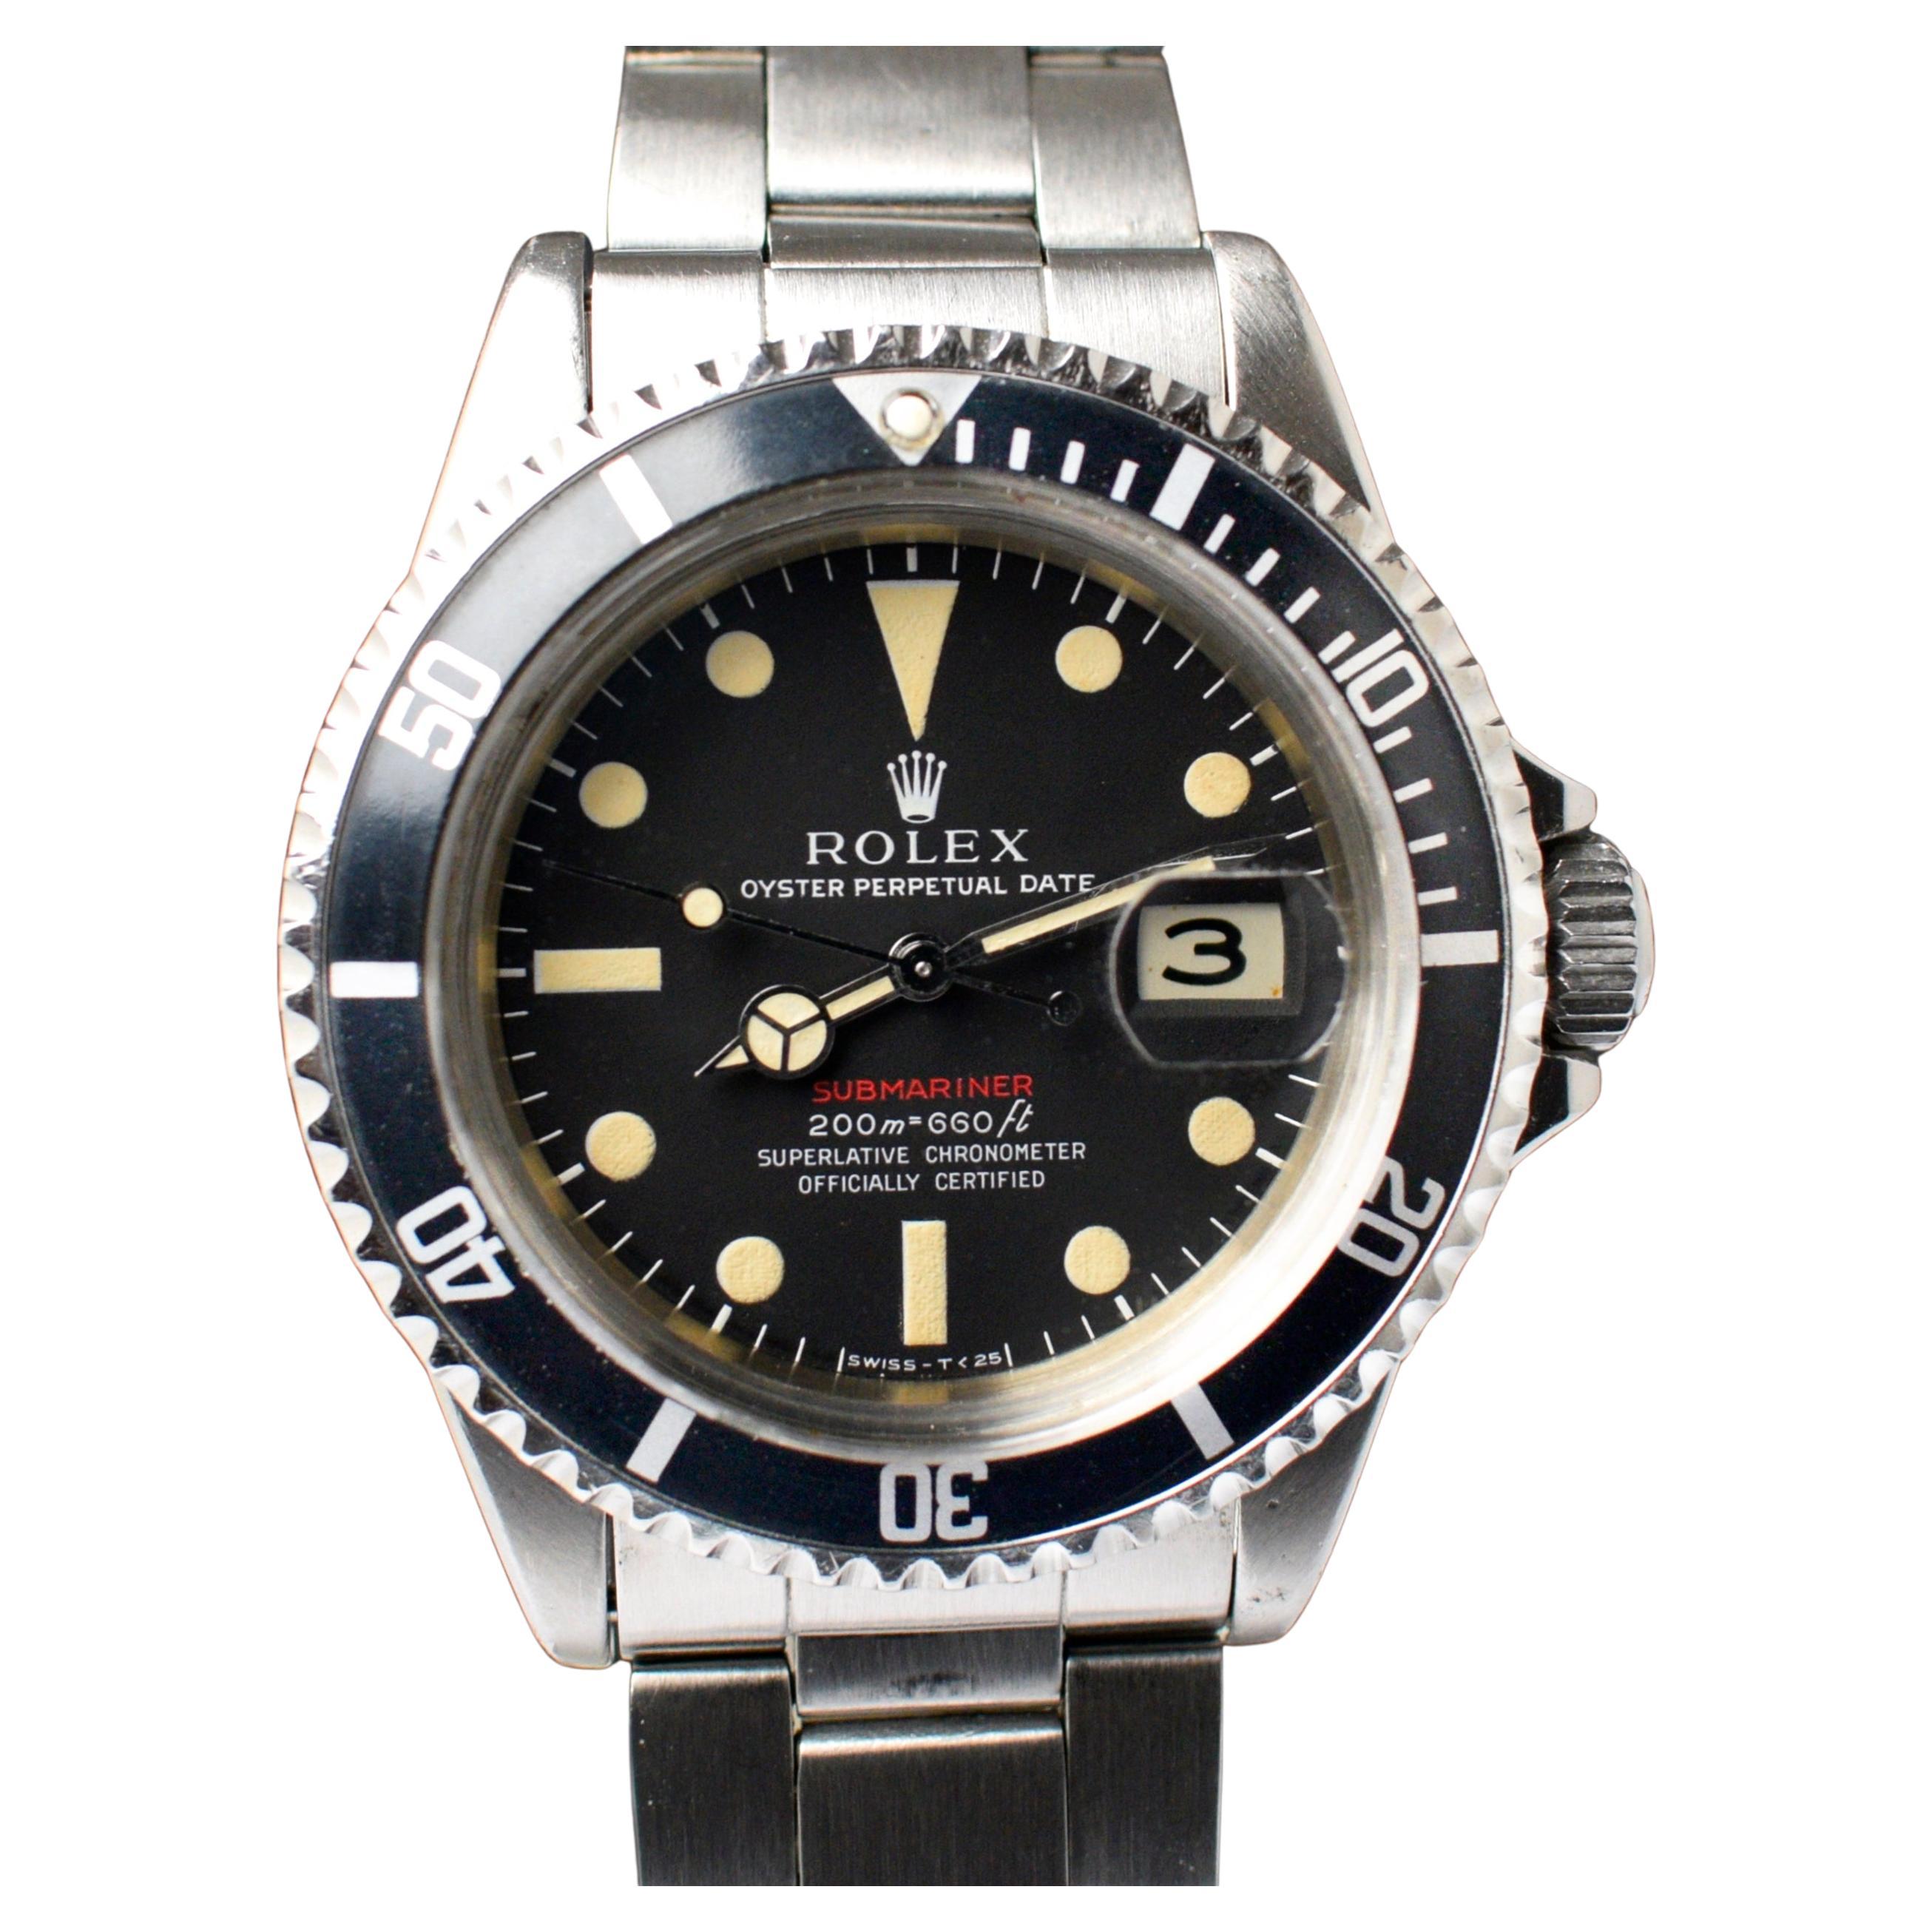 What is a Rolex 1680?